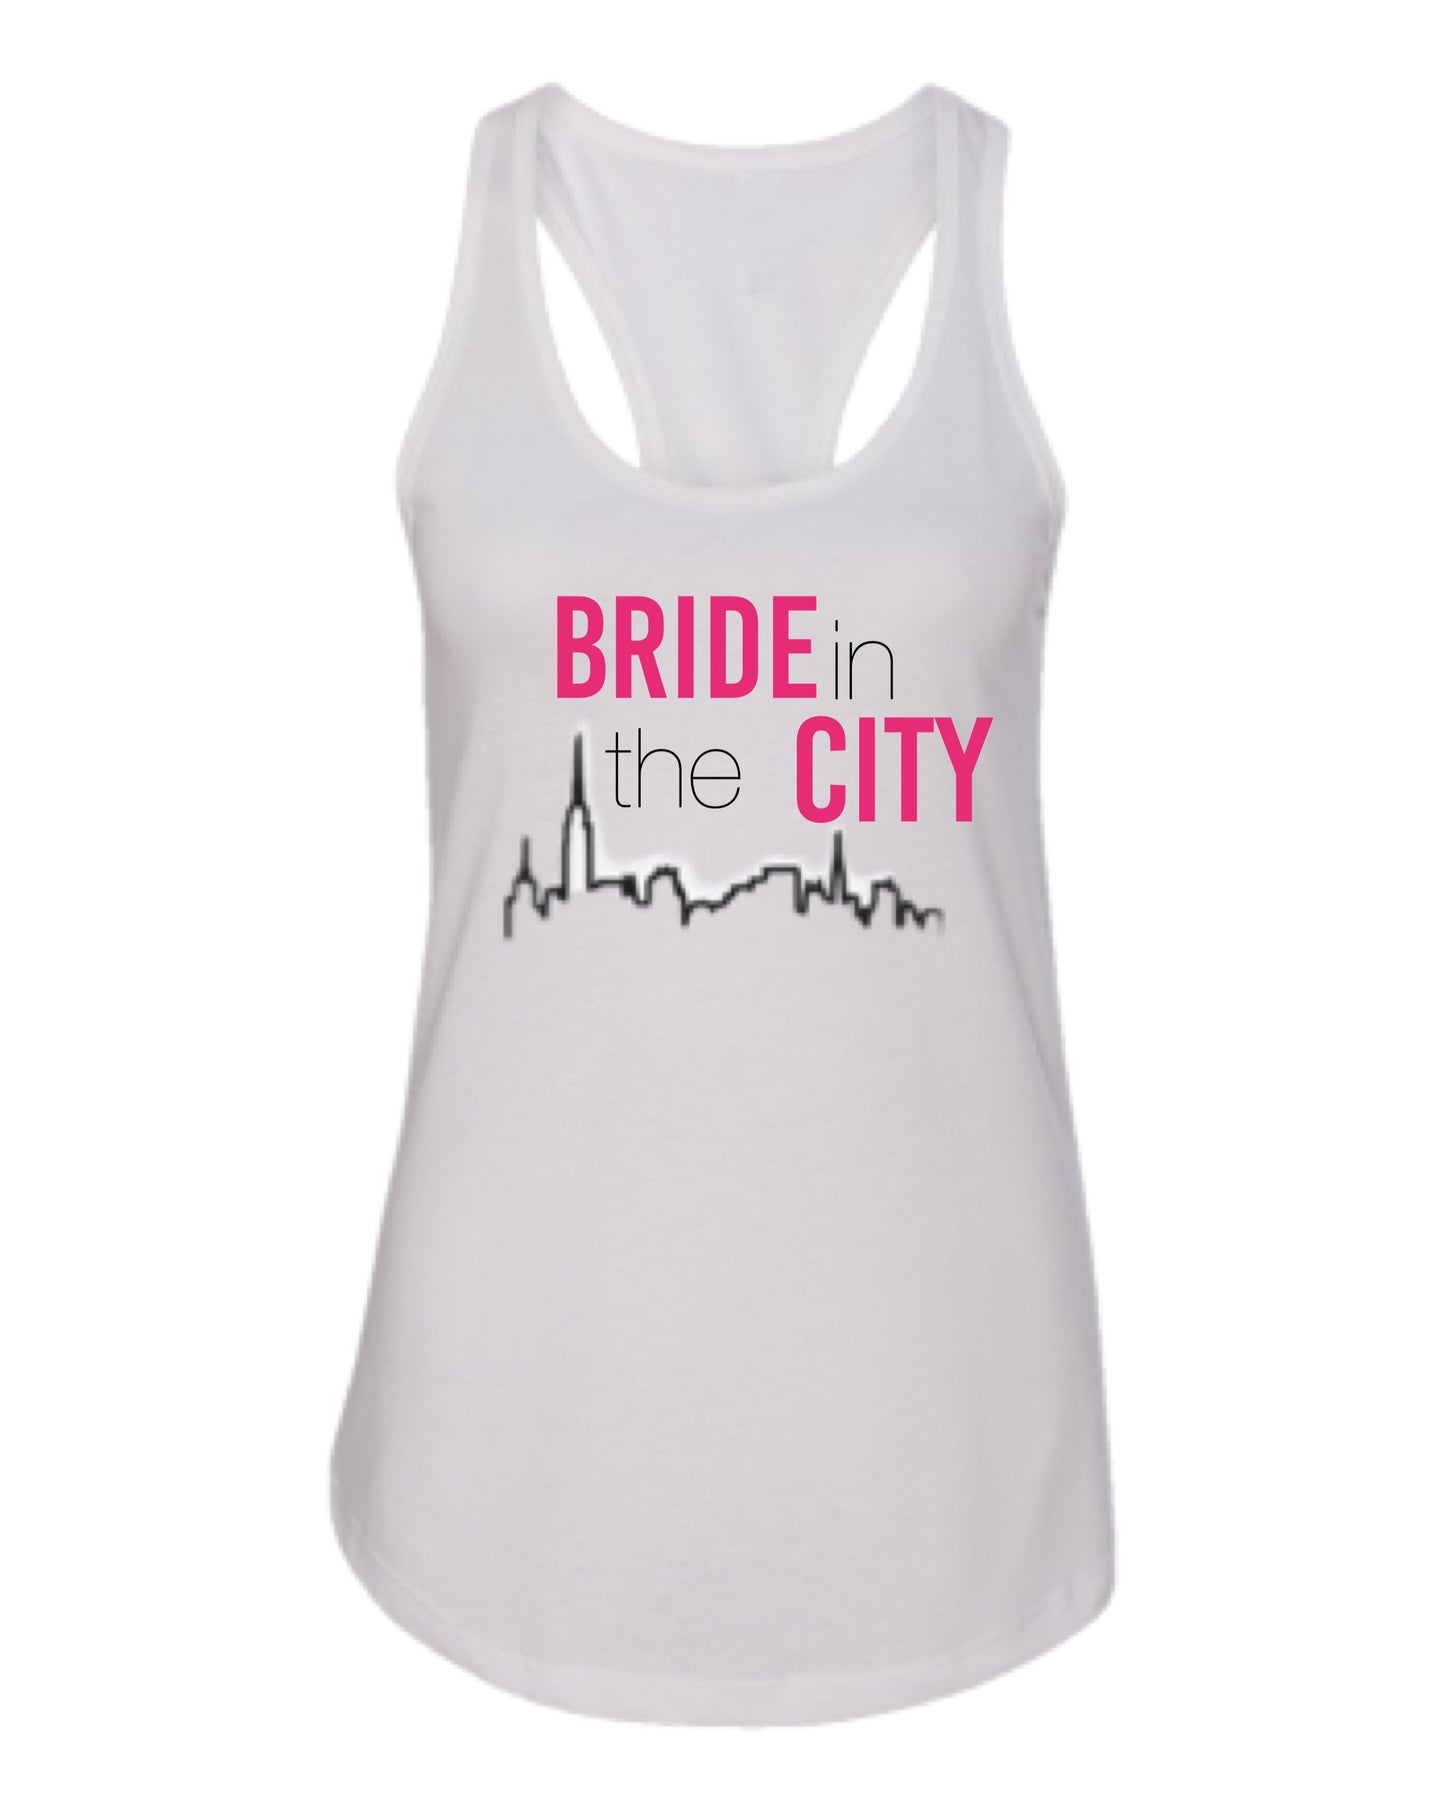 Bride in the city shirt, Sex in the city theme shirt  bride and co shirts, bridesmaid shirts, bachelorette weekend, bride shirt, gift for he